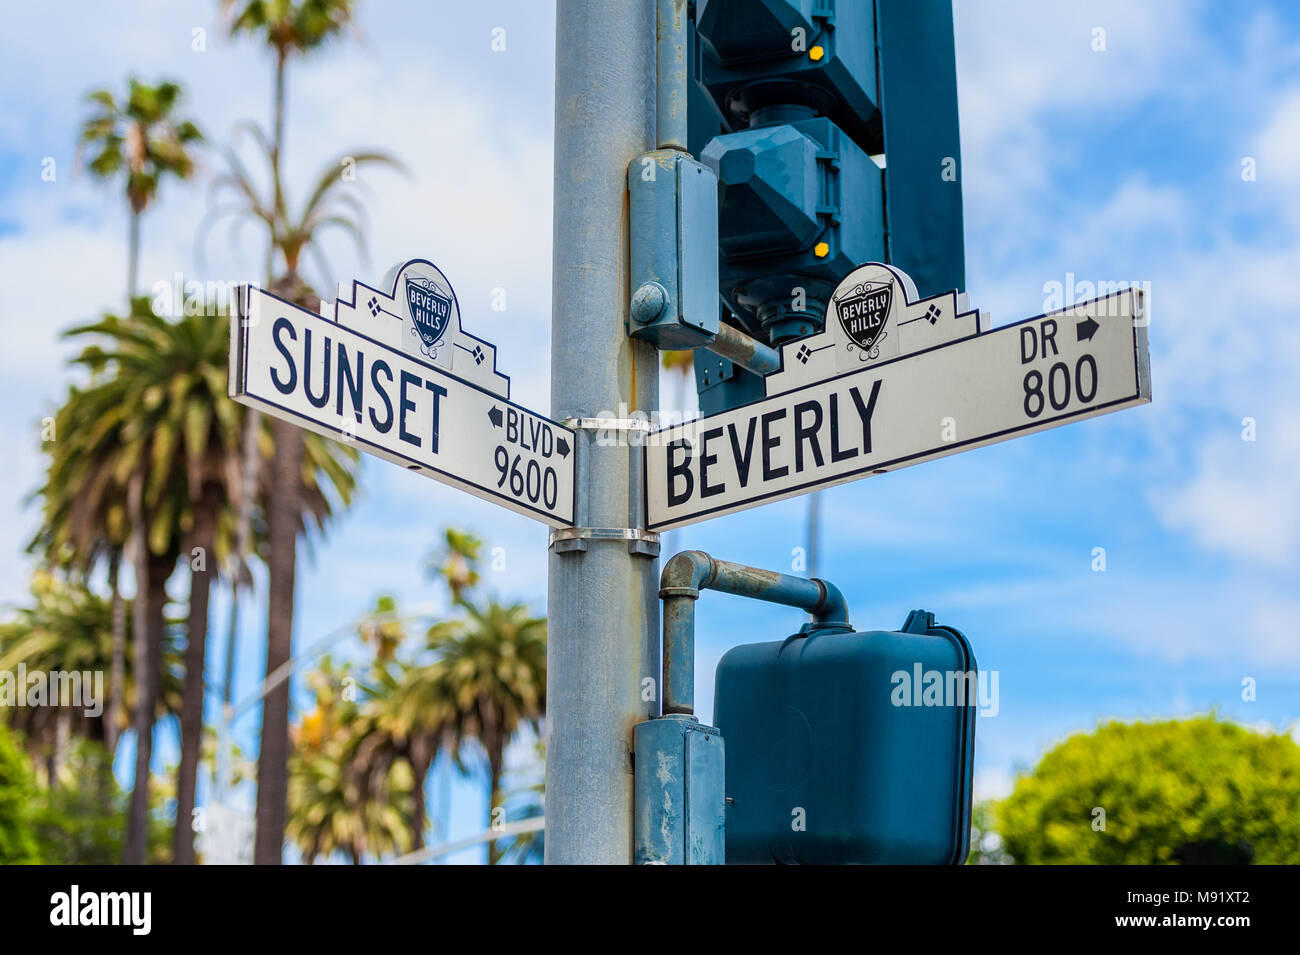 Sunset Boulevard and Beverly Drive Street Signs in Beverly Hills California Stock Photo